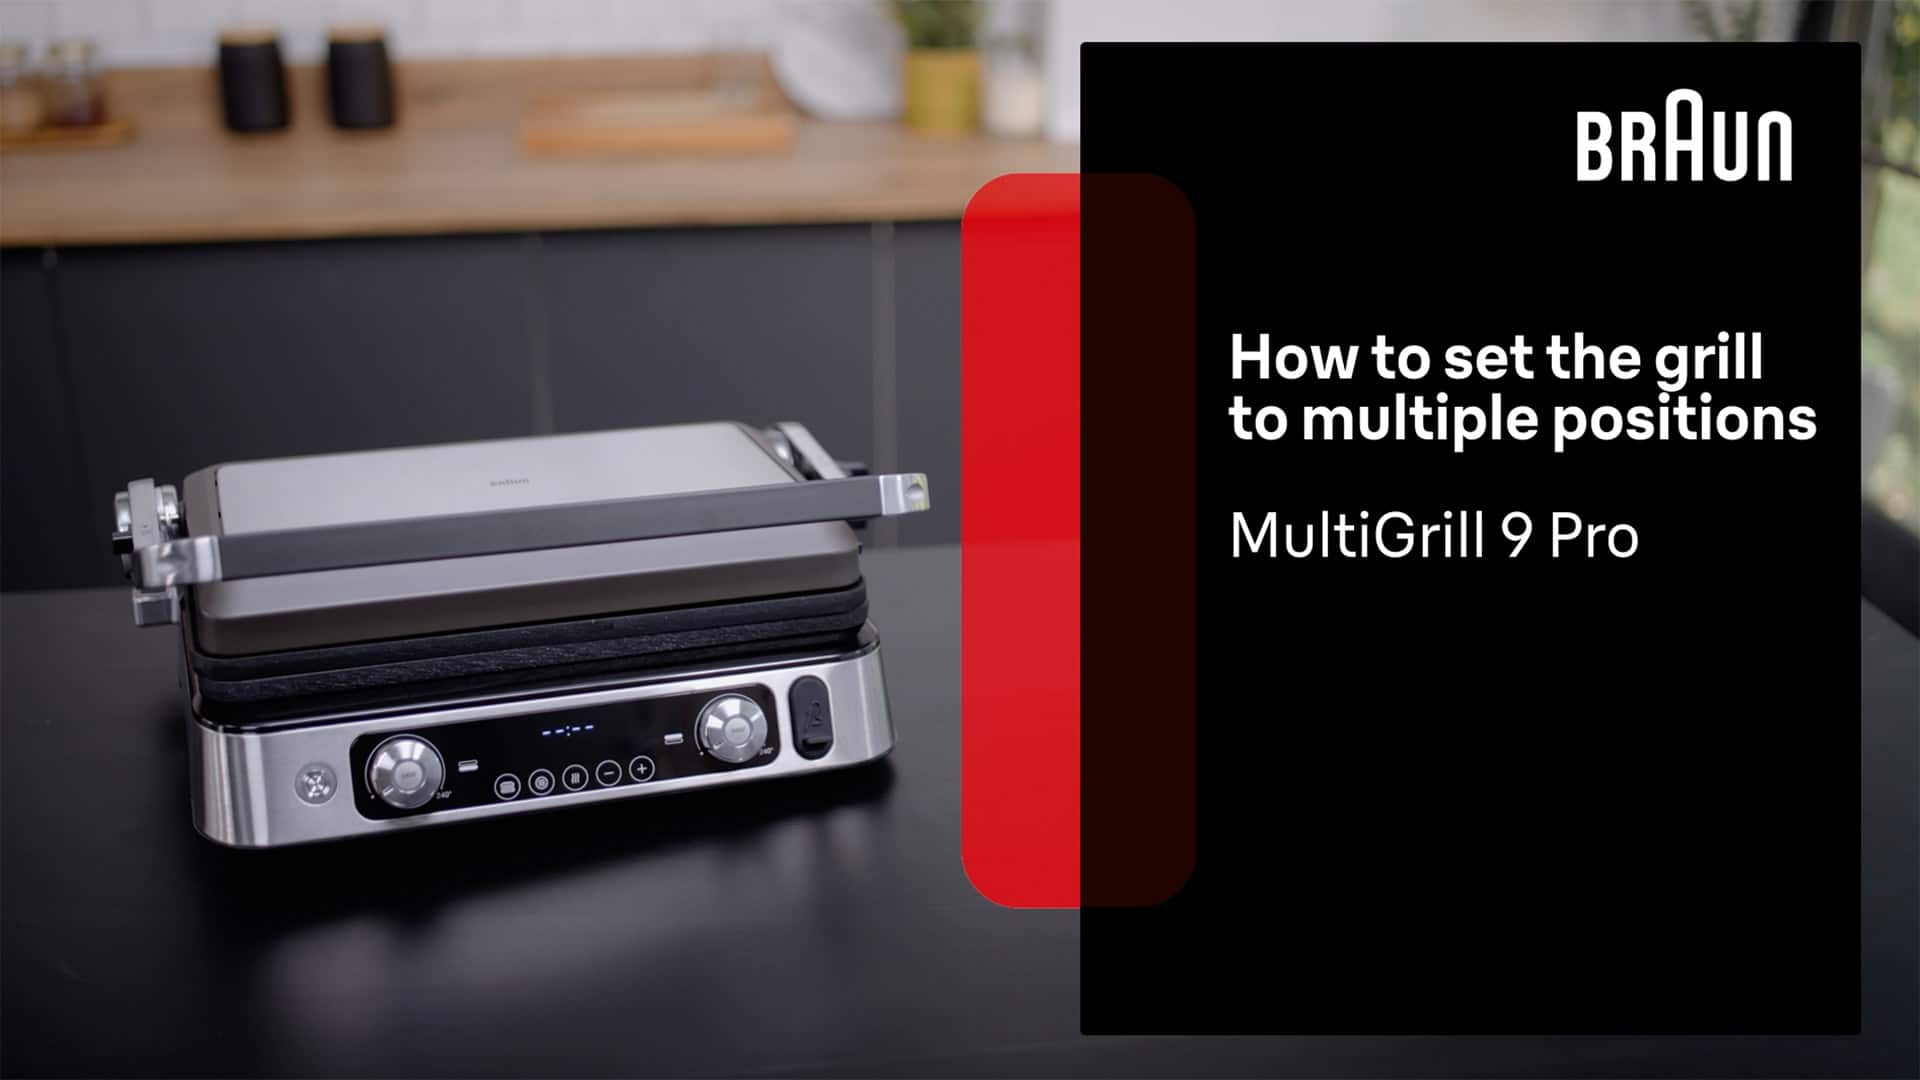 Braun MultiGrill 9 Pro | How to Set the Grill to Multiple Positions